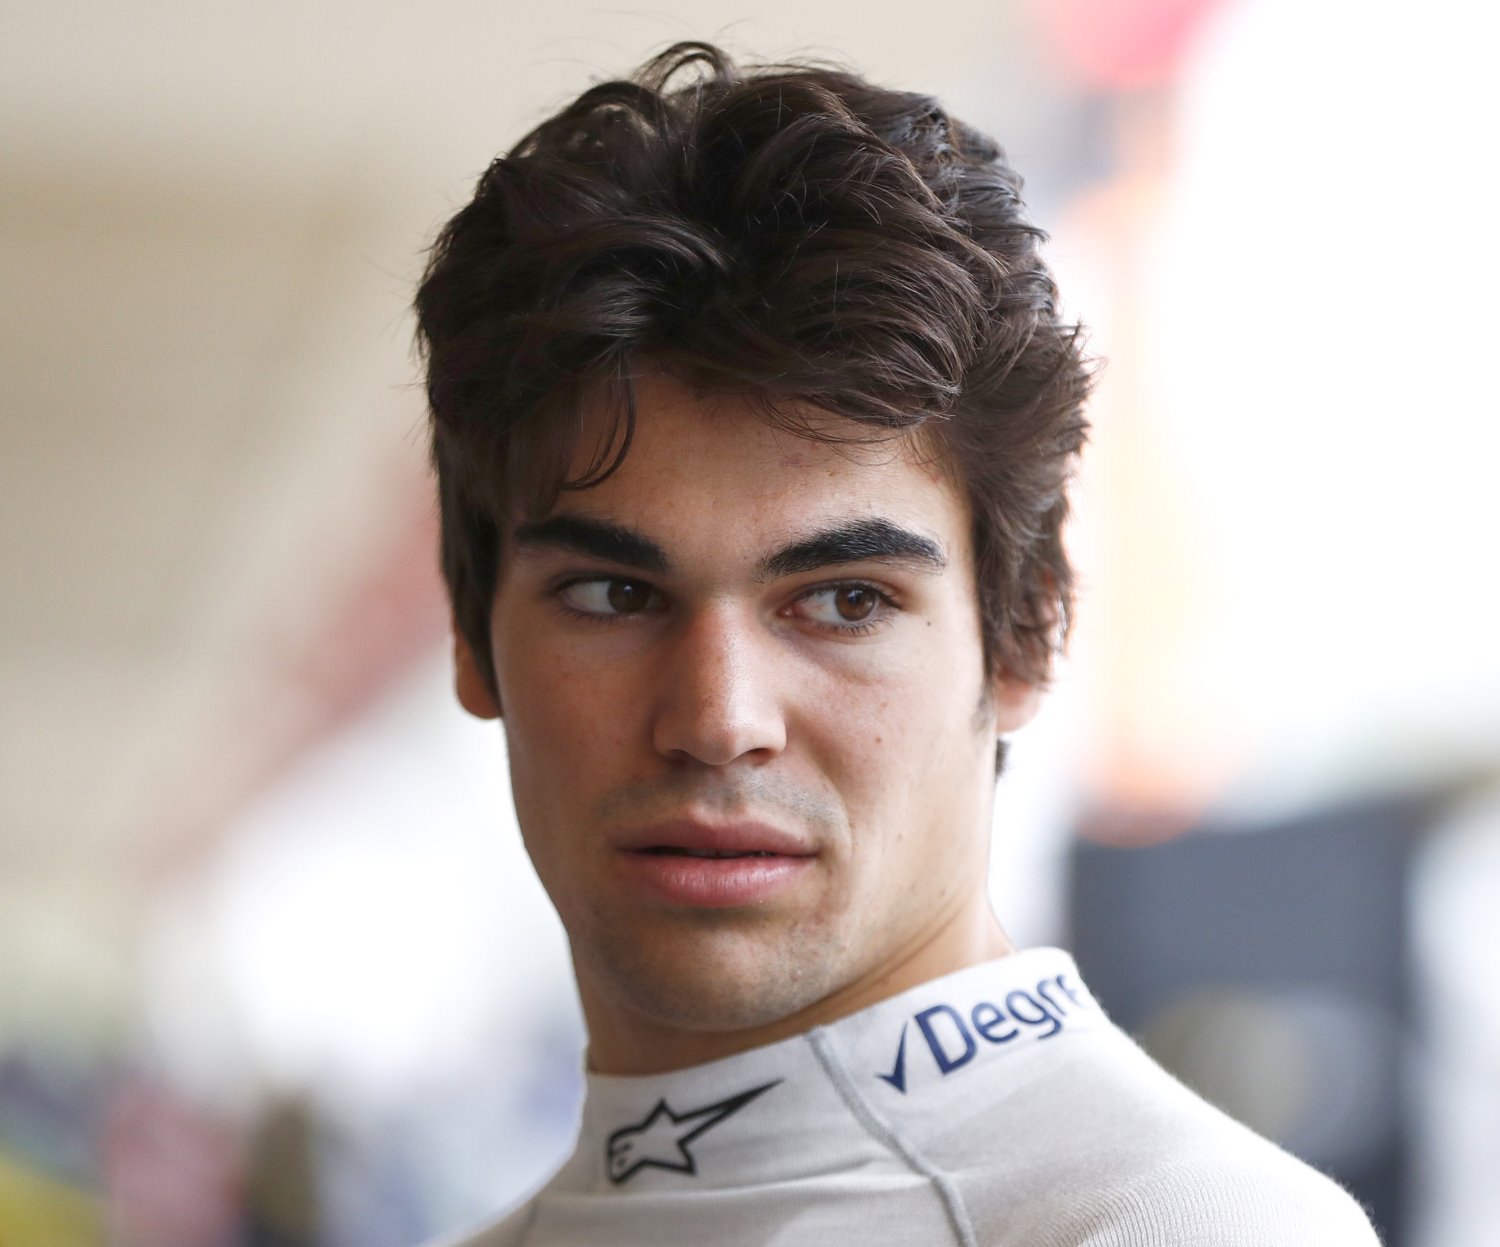 Lance Stroll - his daddy bought him an F1 team